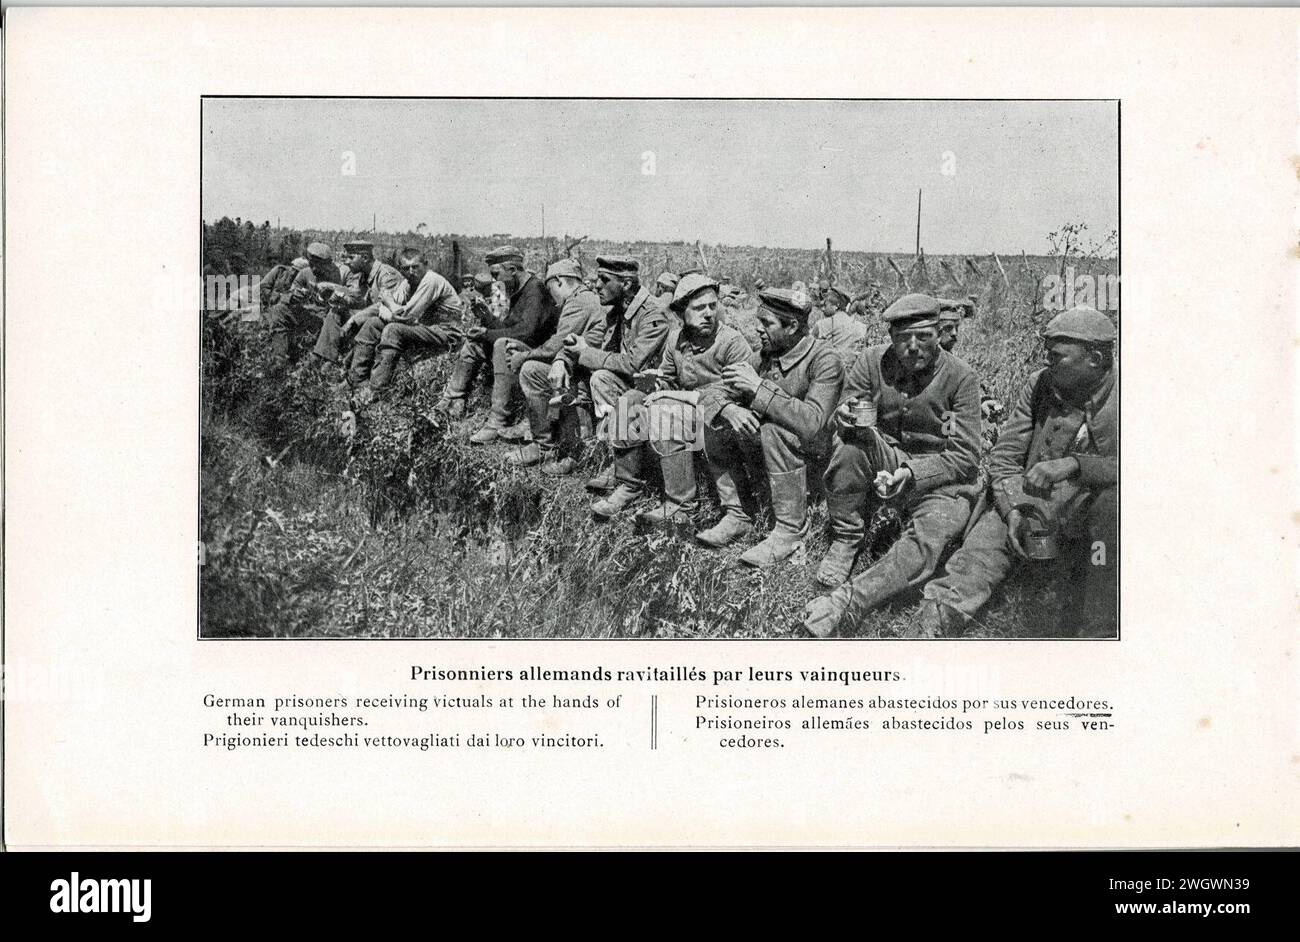 Armee francaise-1916-service Photo-a26. Foto Stock